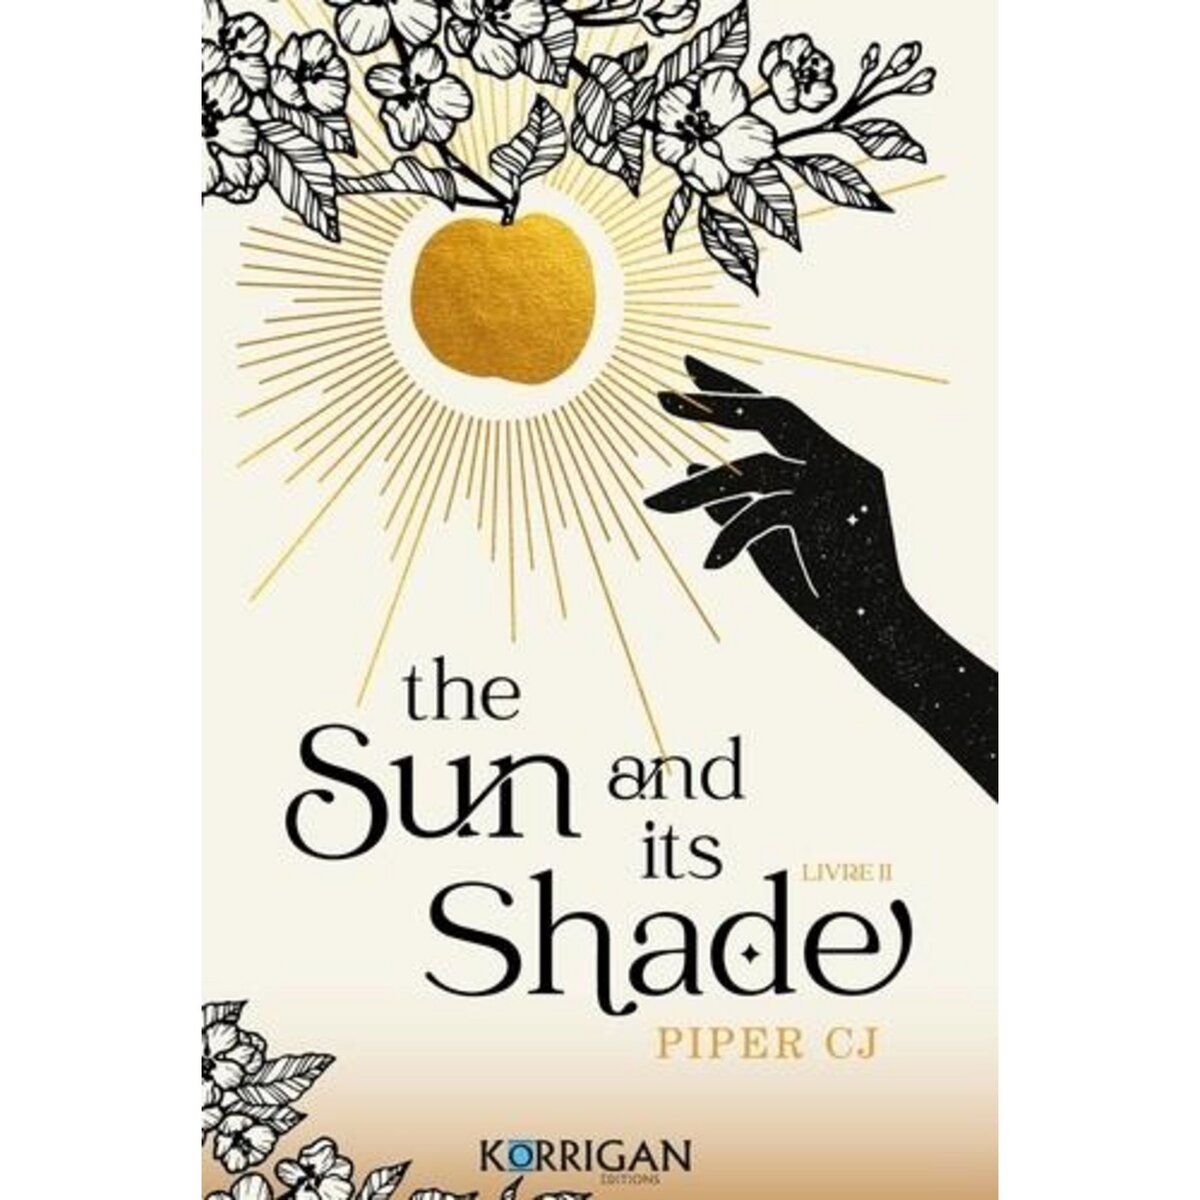  THE NIGHT AND ITS MOON TOME 2 : THE SUN AND ITS SHADE, Piper CJ